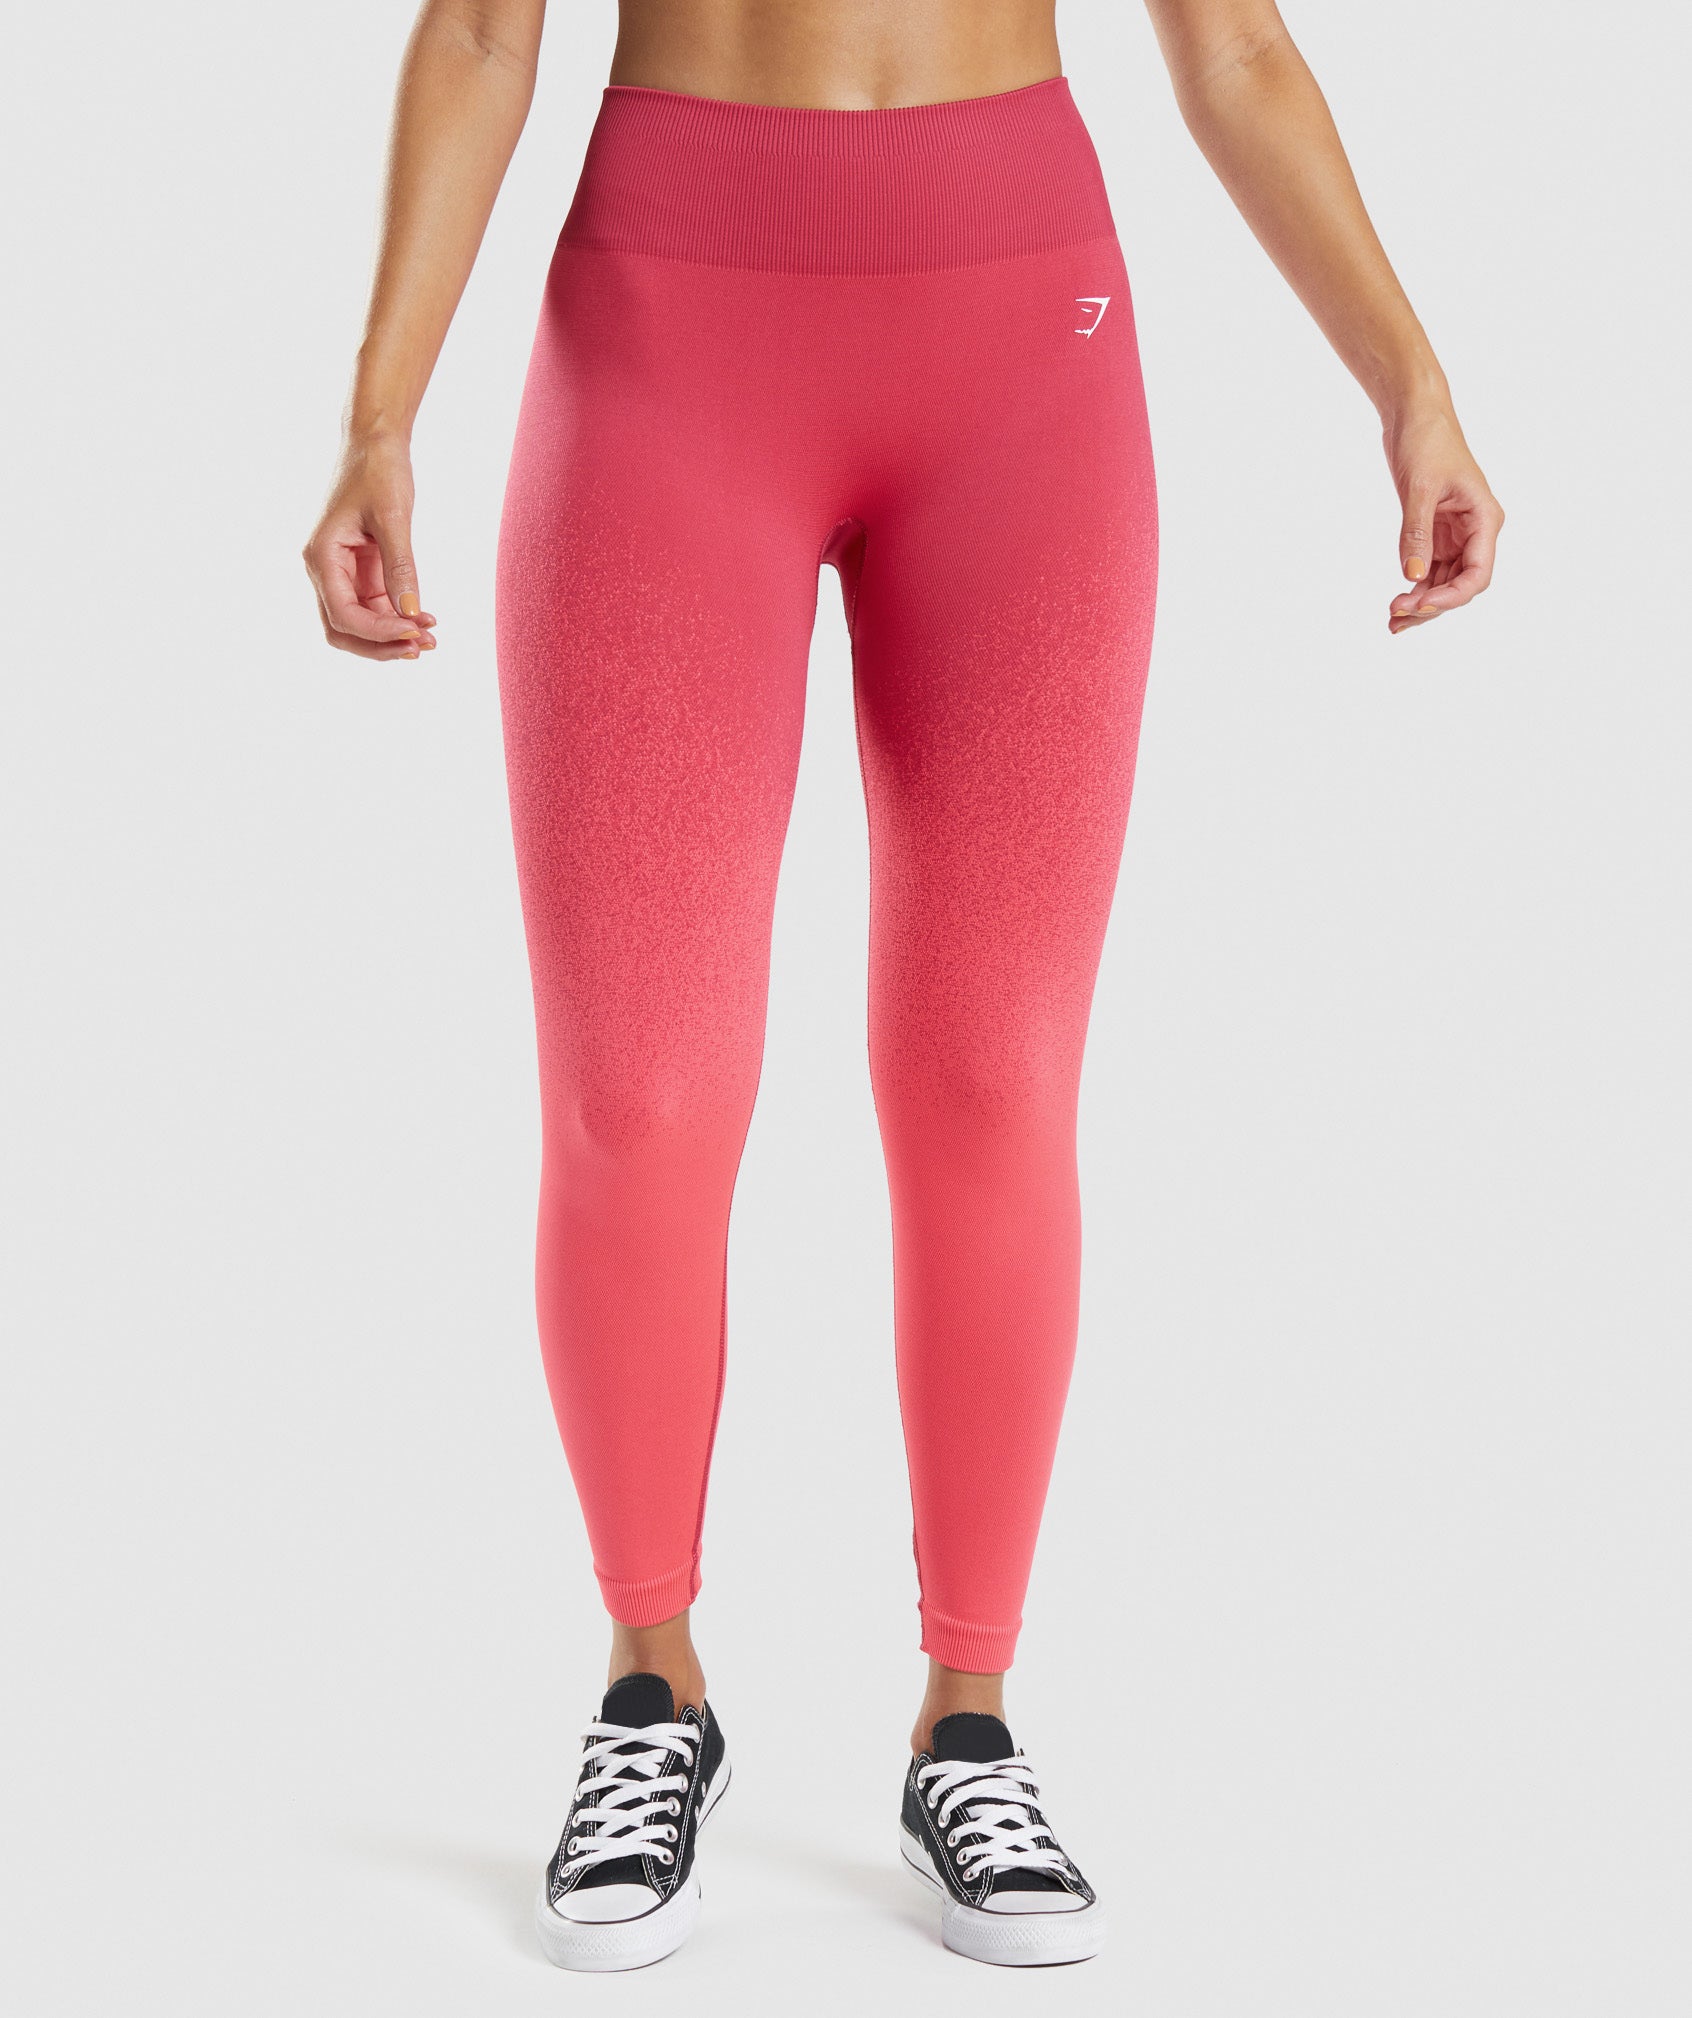 Gymshark Adapt Ombré Seamless Leggings Pink Size XS - $30 (50% Off Retail)  - From Celia